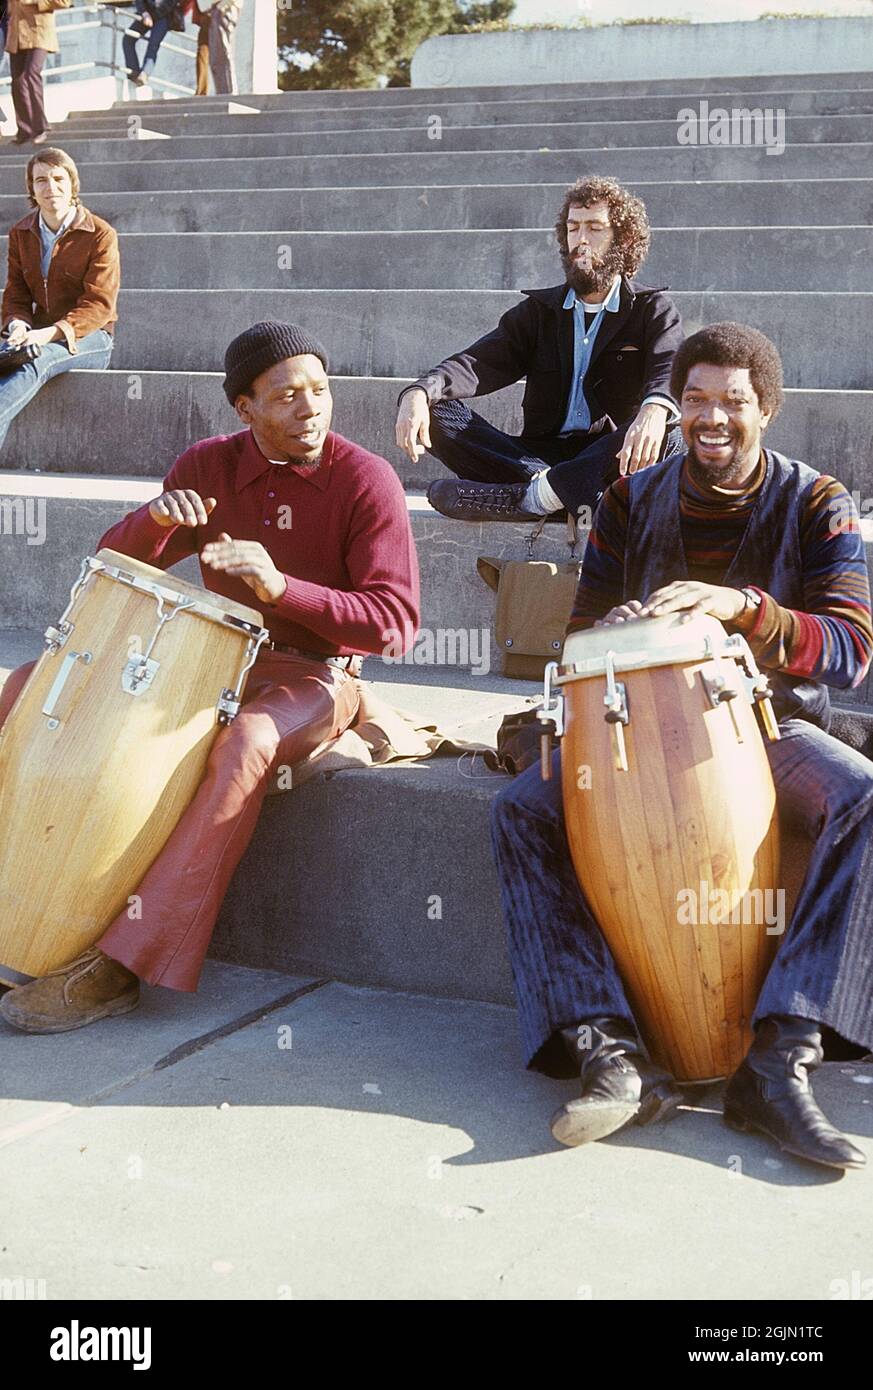 USA San Francisco 1968. Three men are playing on drums while a man is sitting in the background meditating. Kodachrome slide original.   Credit Roland Palm ref 6-1-19 Stock Photo